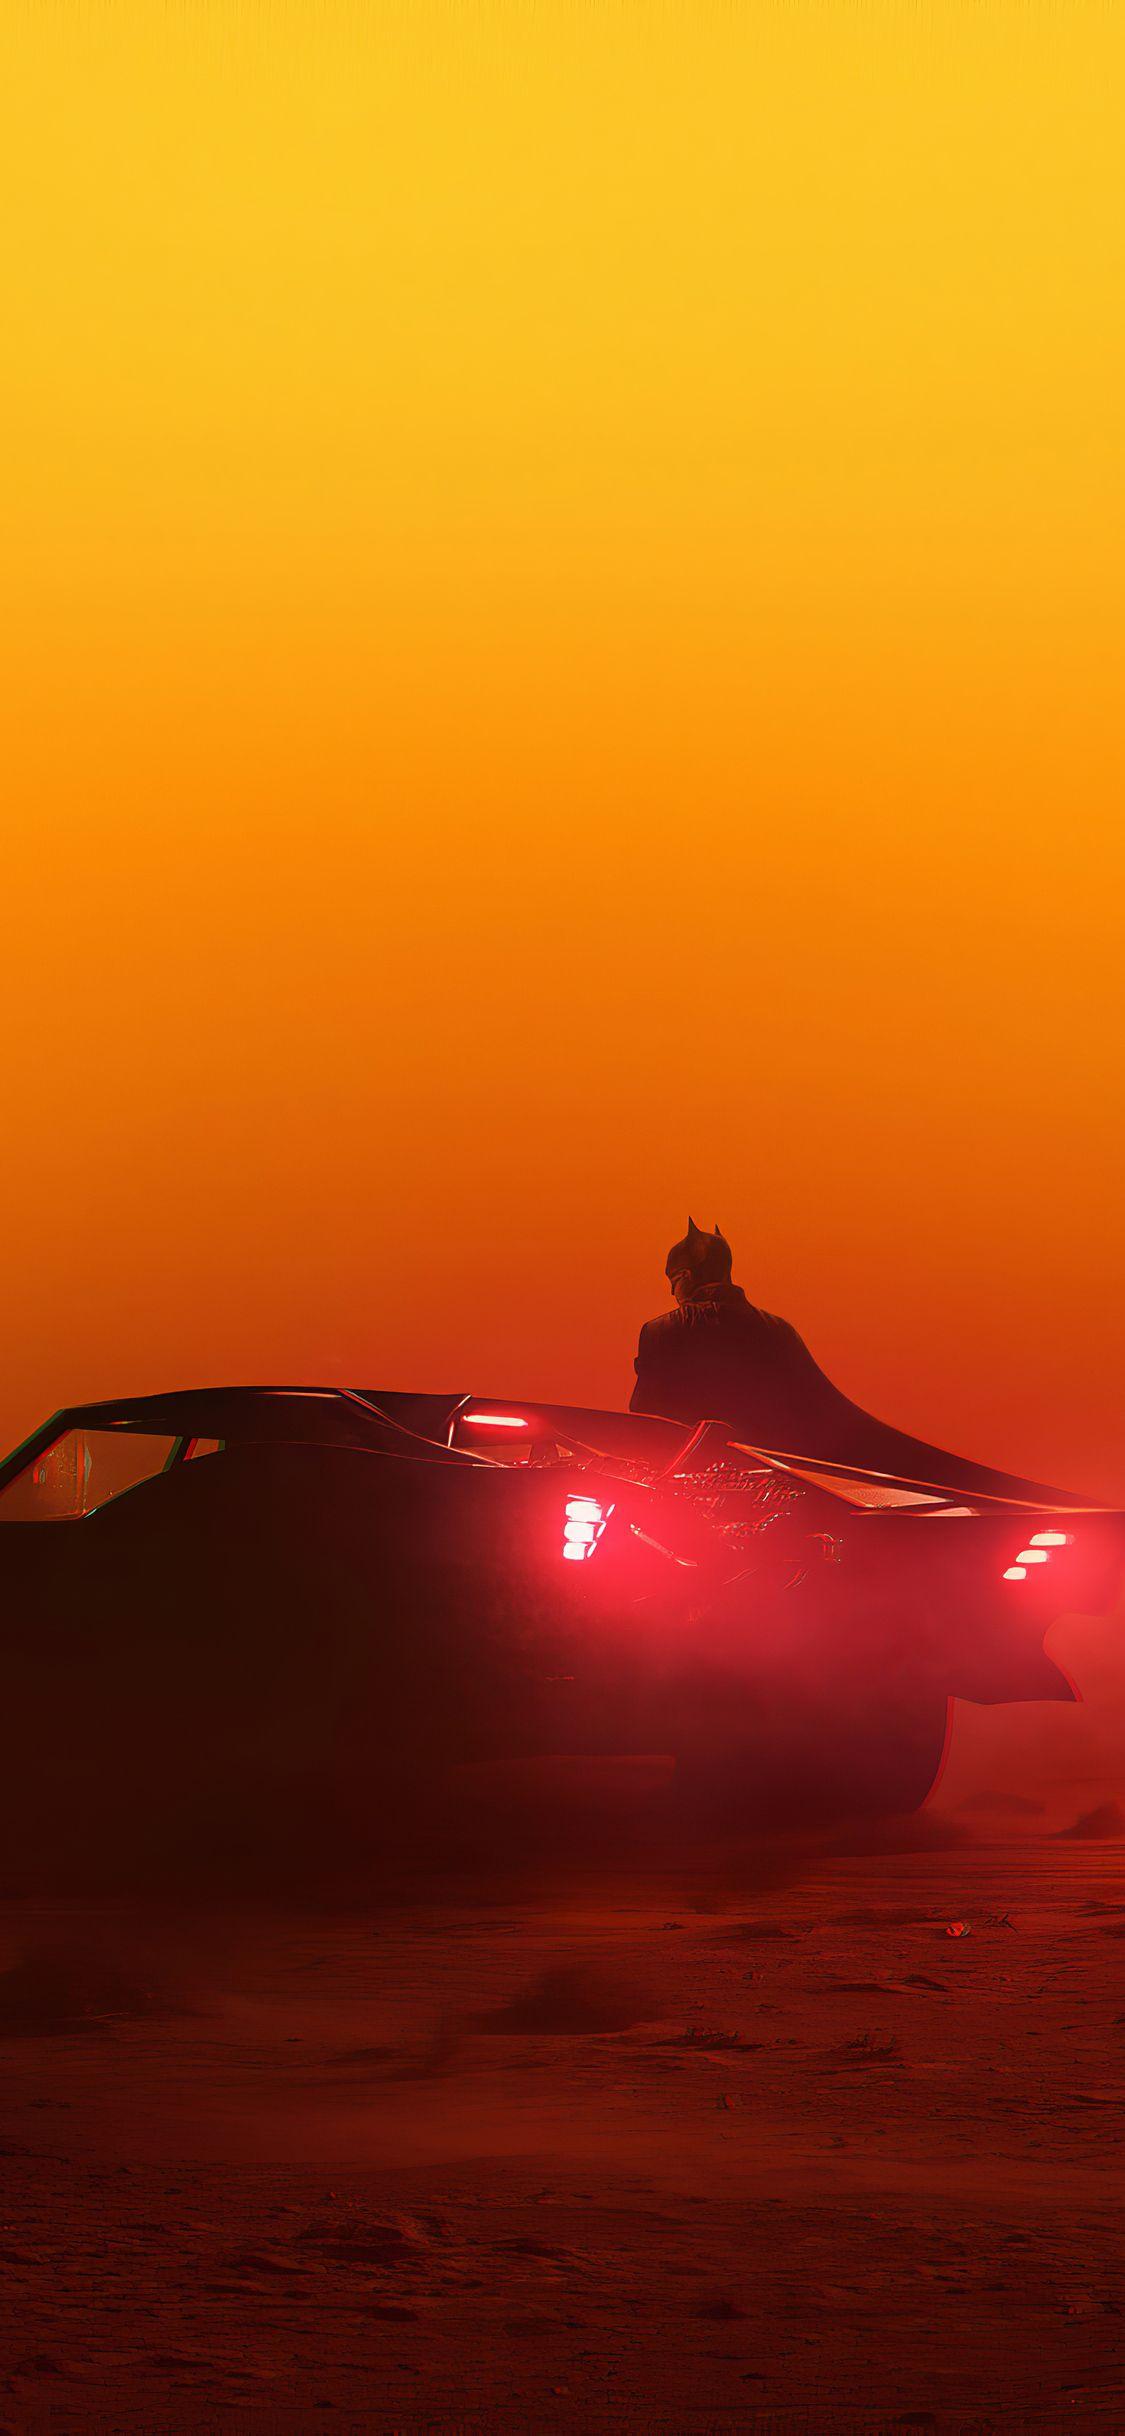 Blade Runner 2049 HD 1080x1920 iPhone 8766S Plus wallpaper background  picture image